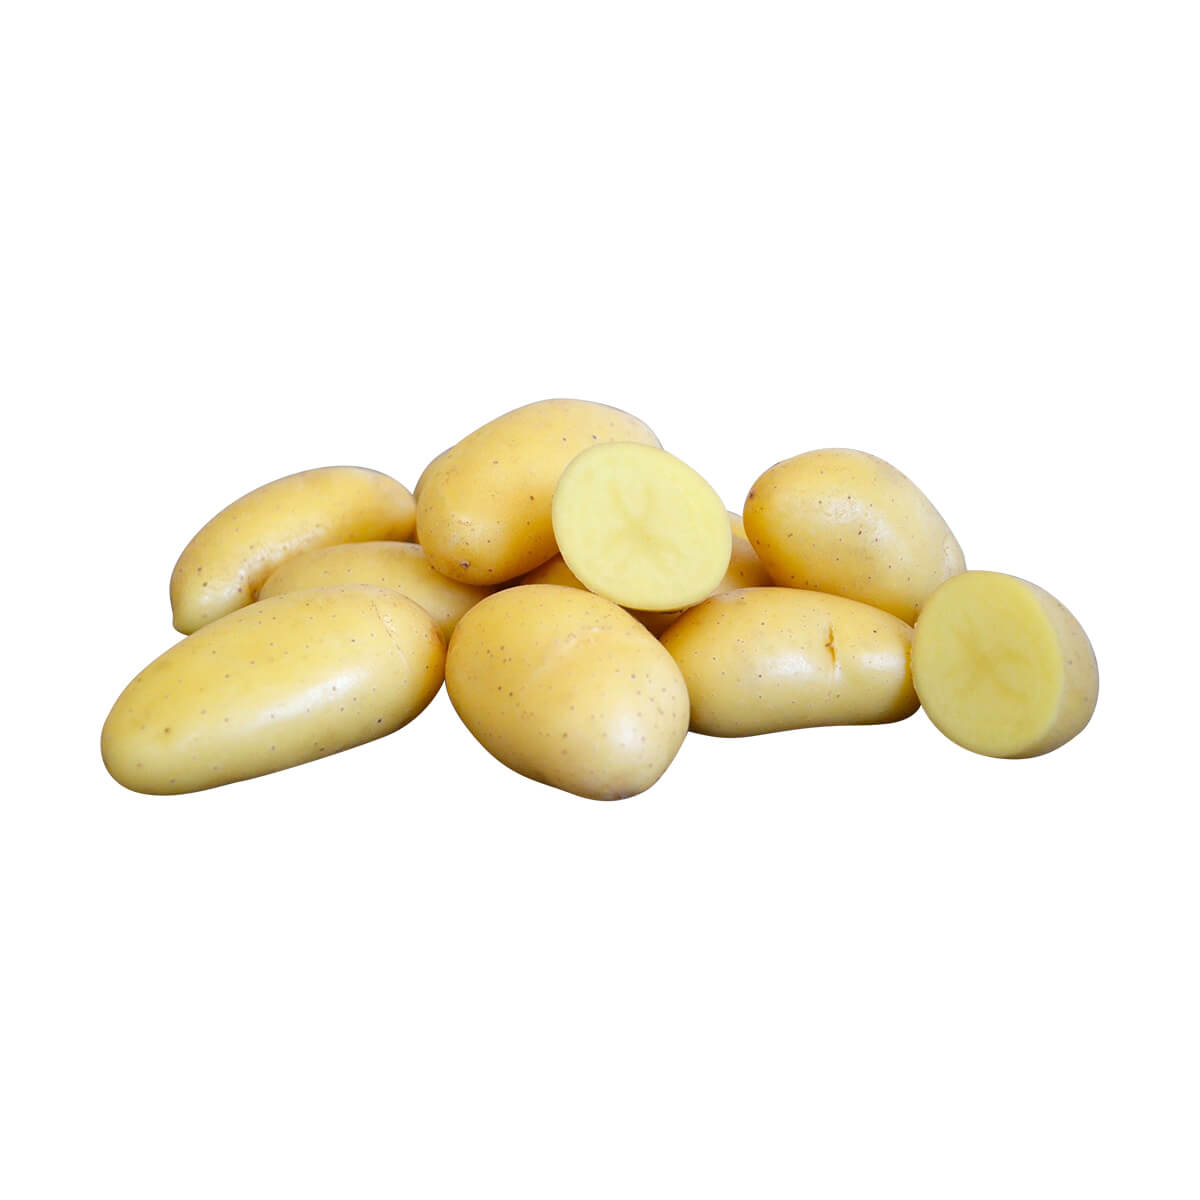 Jazzy Baby Whole Seed Potatoes - 2.2 lb